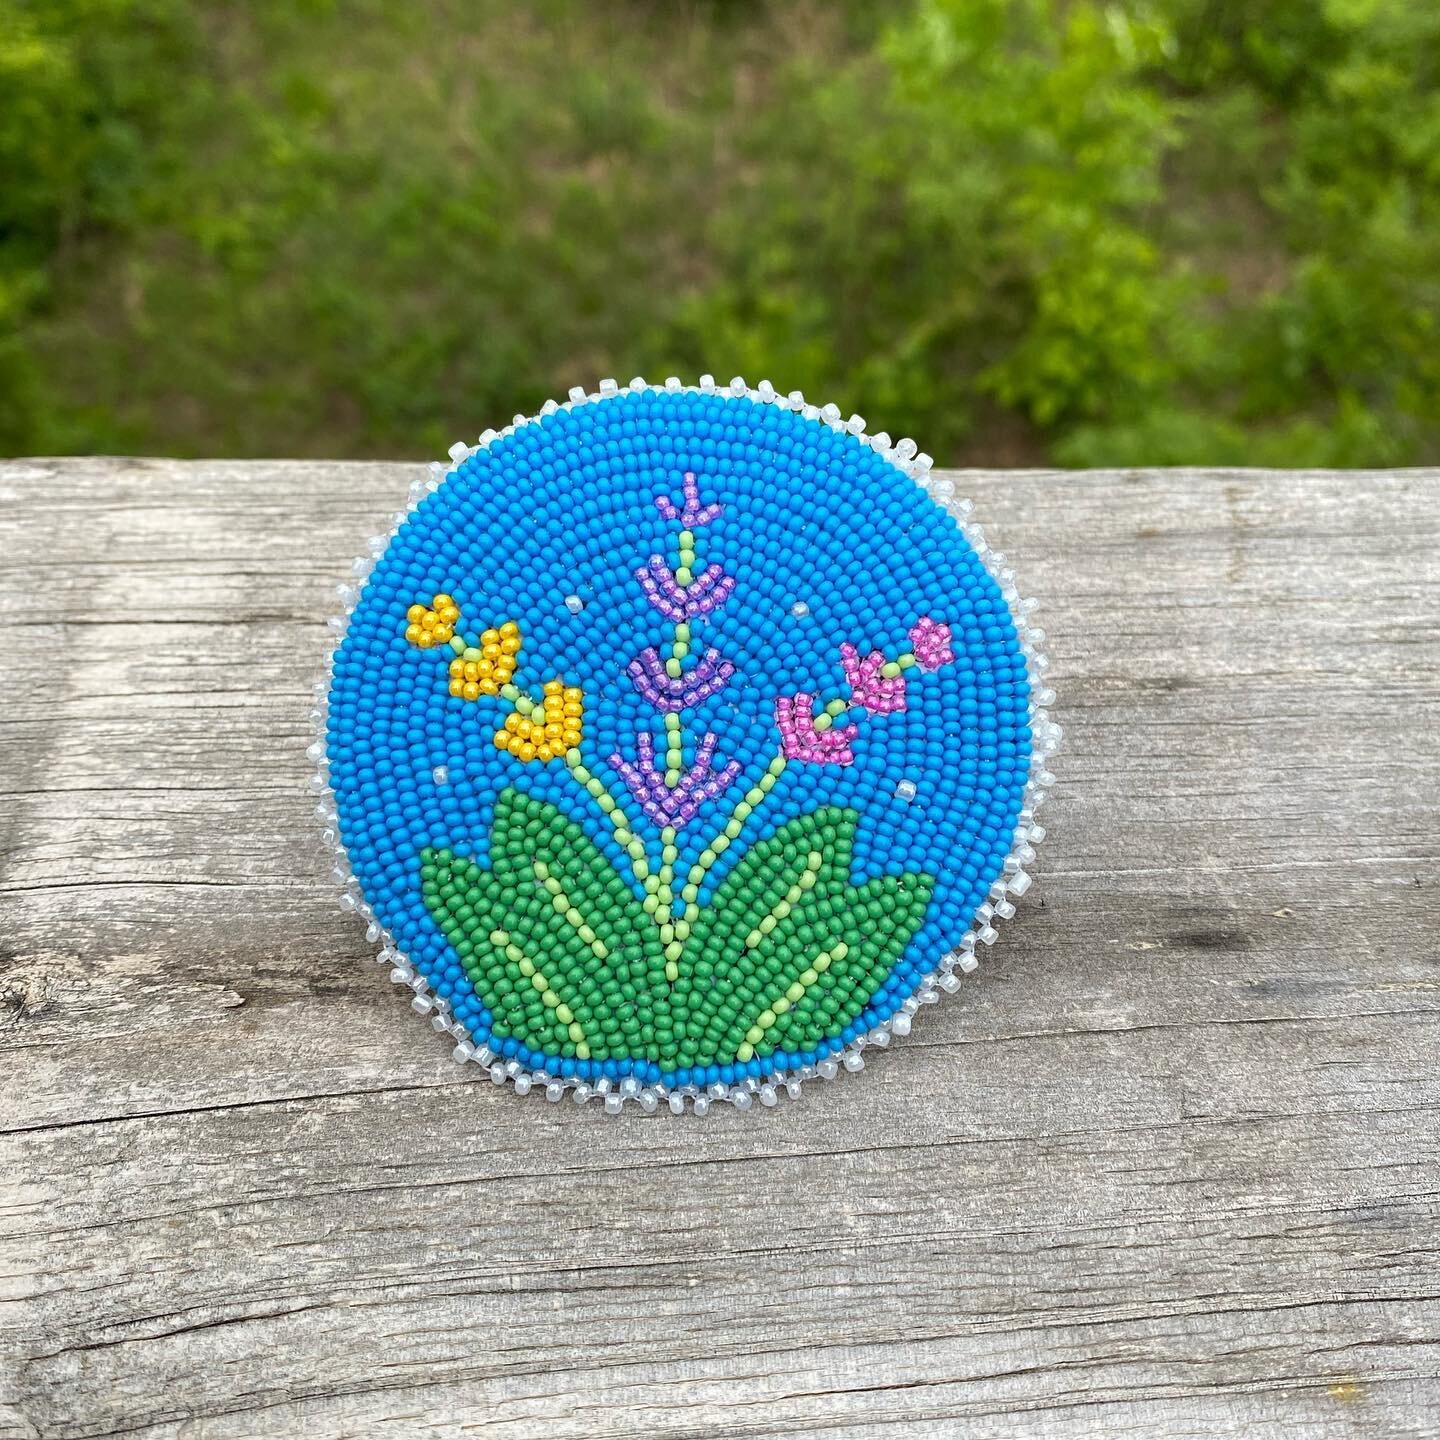 first time attempting the #beadthisinyourstylechallenge &mdash; glad it came back!
&bull;&bull;&bull;
#april2023beadthisinyourstyle #chickasaw #choctaw #learningtobead #beadembroidery #beadwork